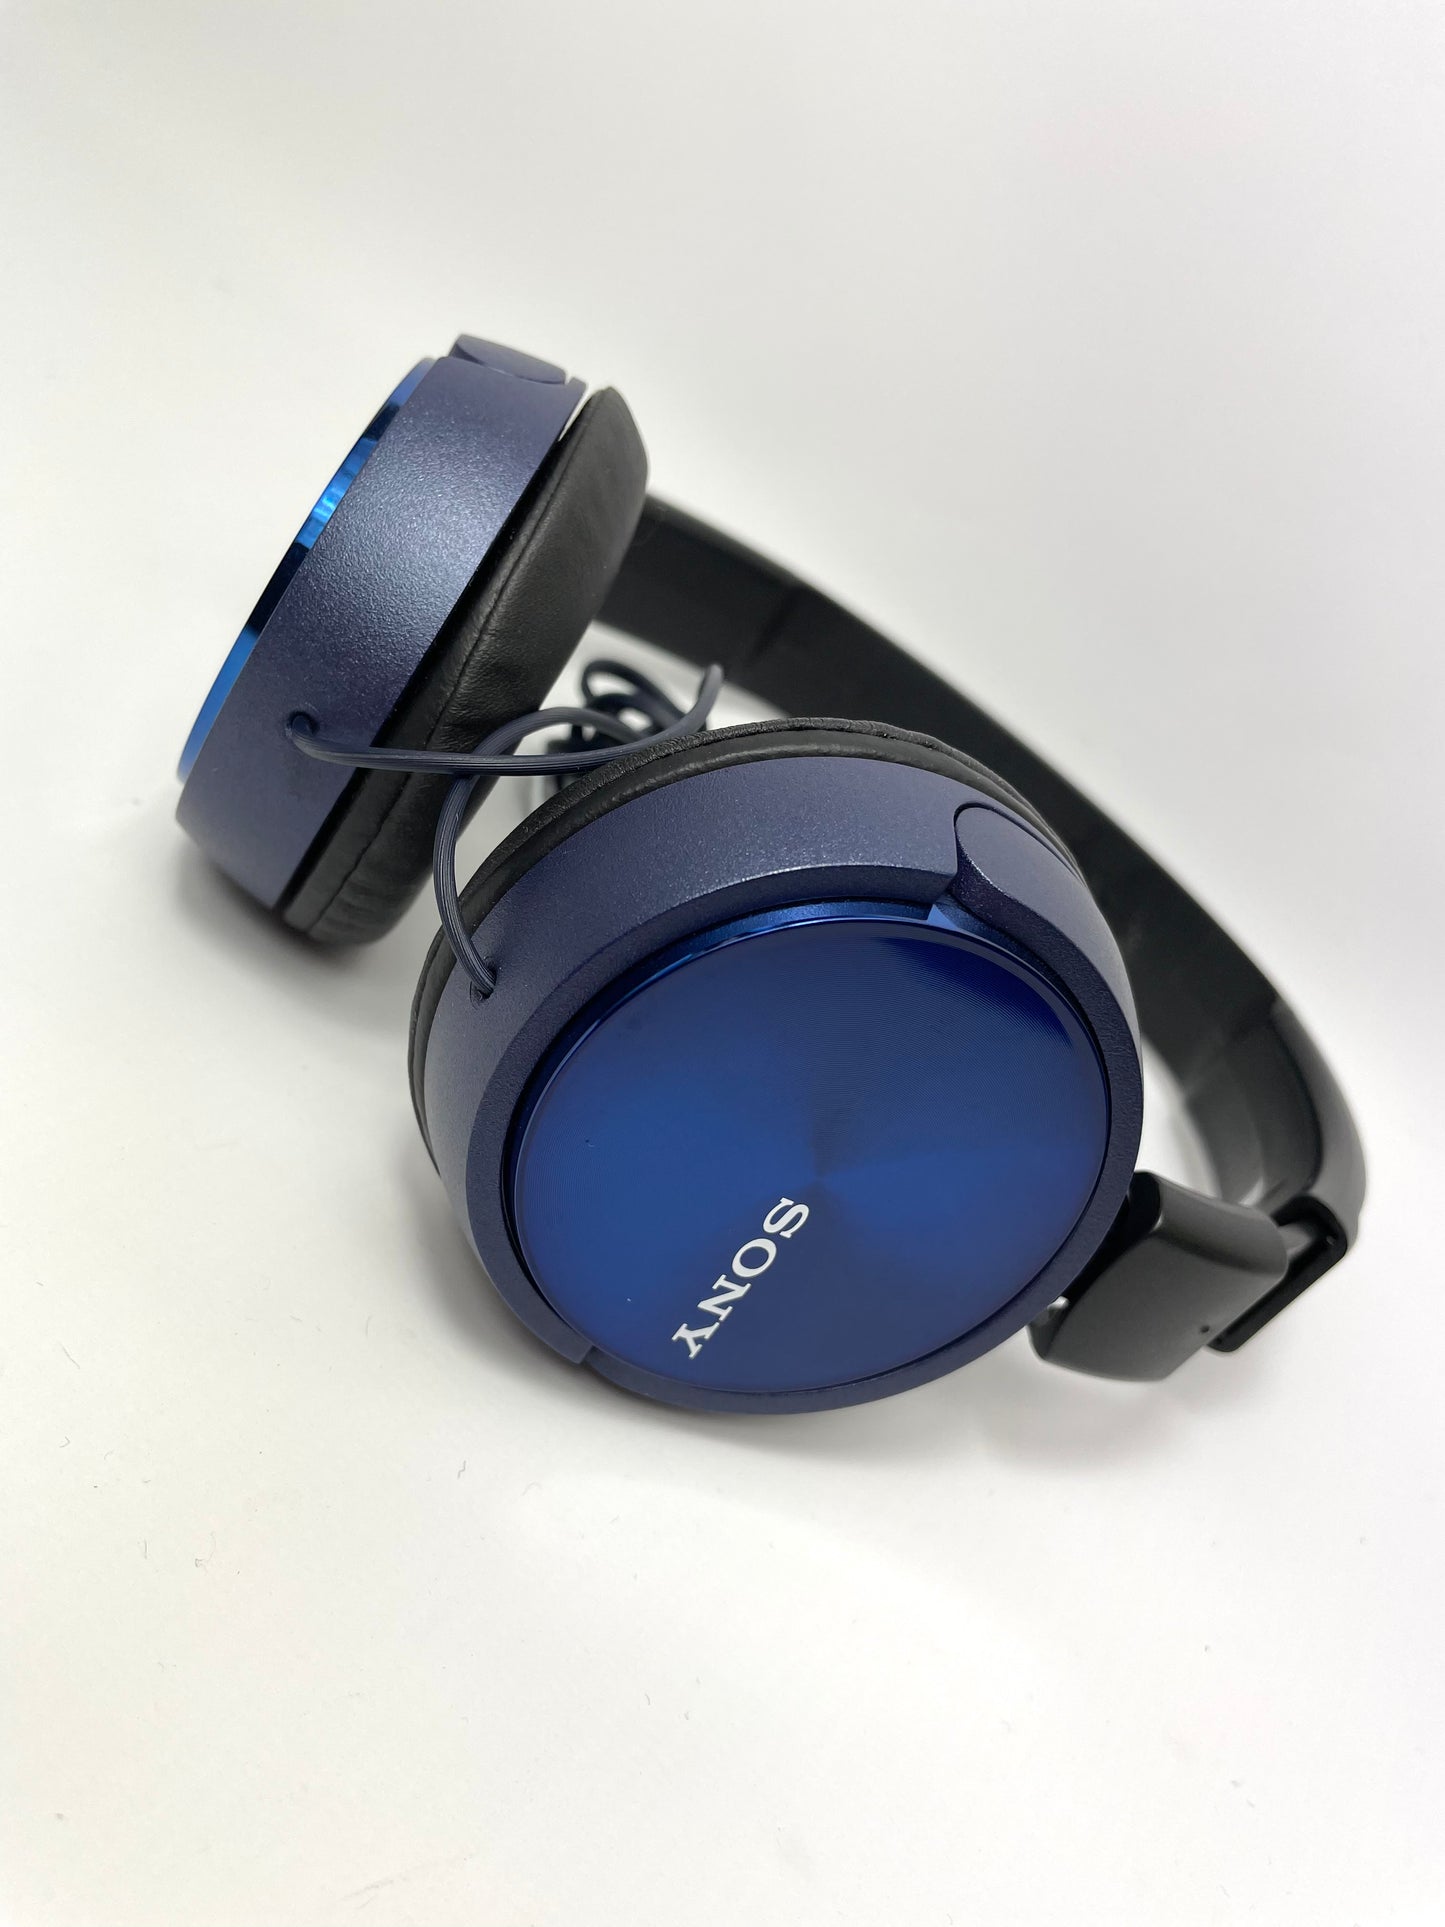 Sony Wired MDR-ZX310 On-Ear Headphones with Microphone Foldable in Blue